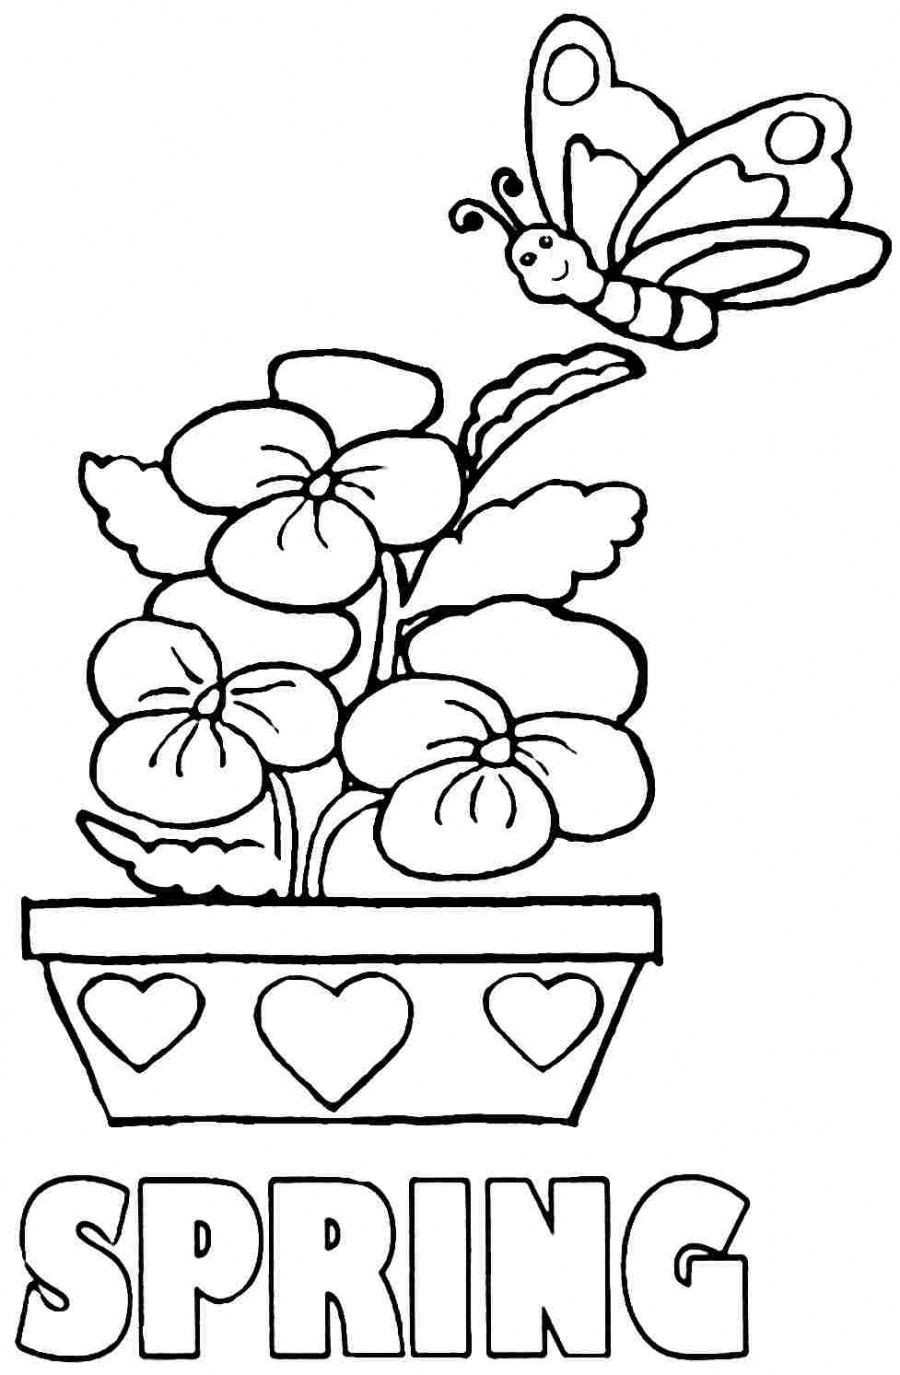 Spring Coloring Pages For Preschoolers at GetDrawings | Free download